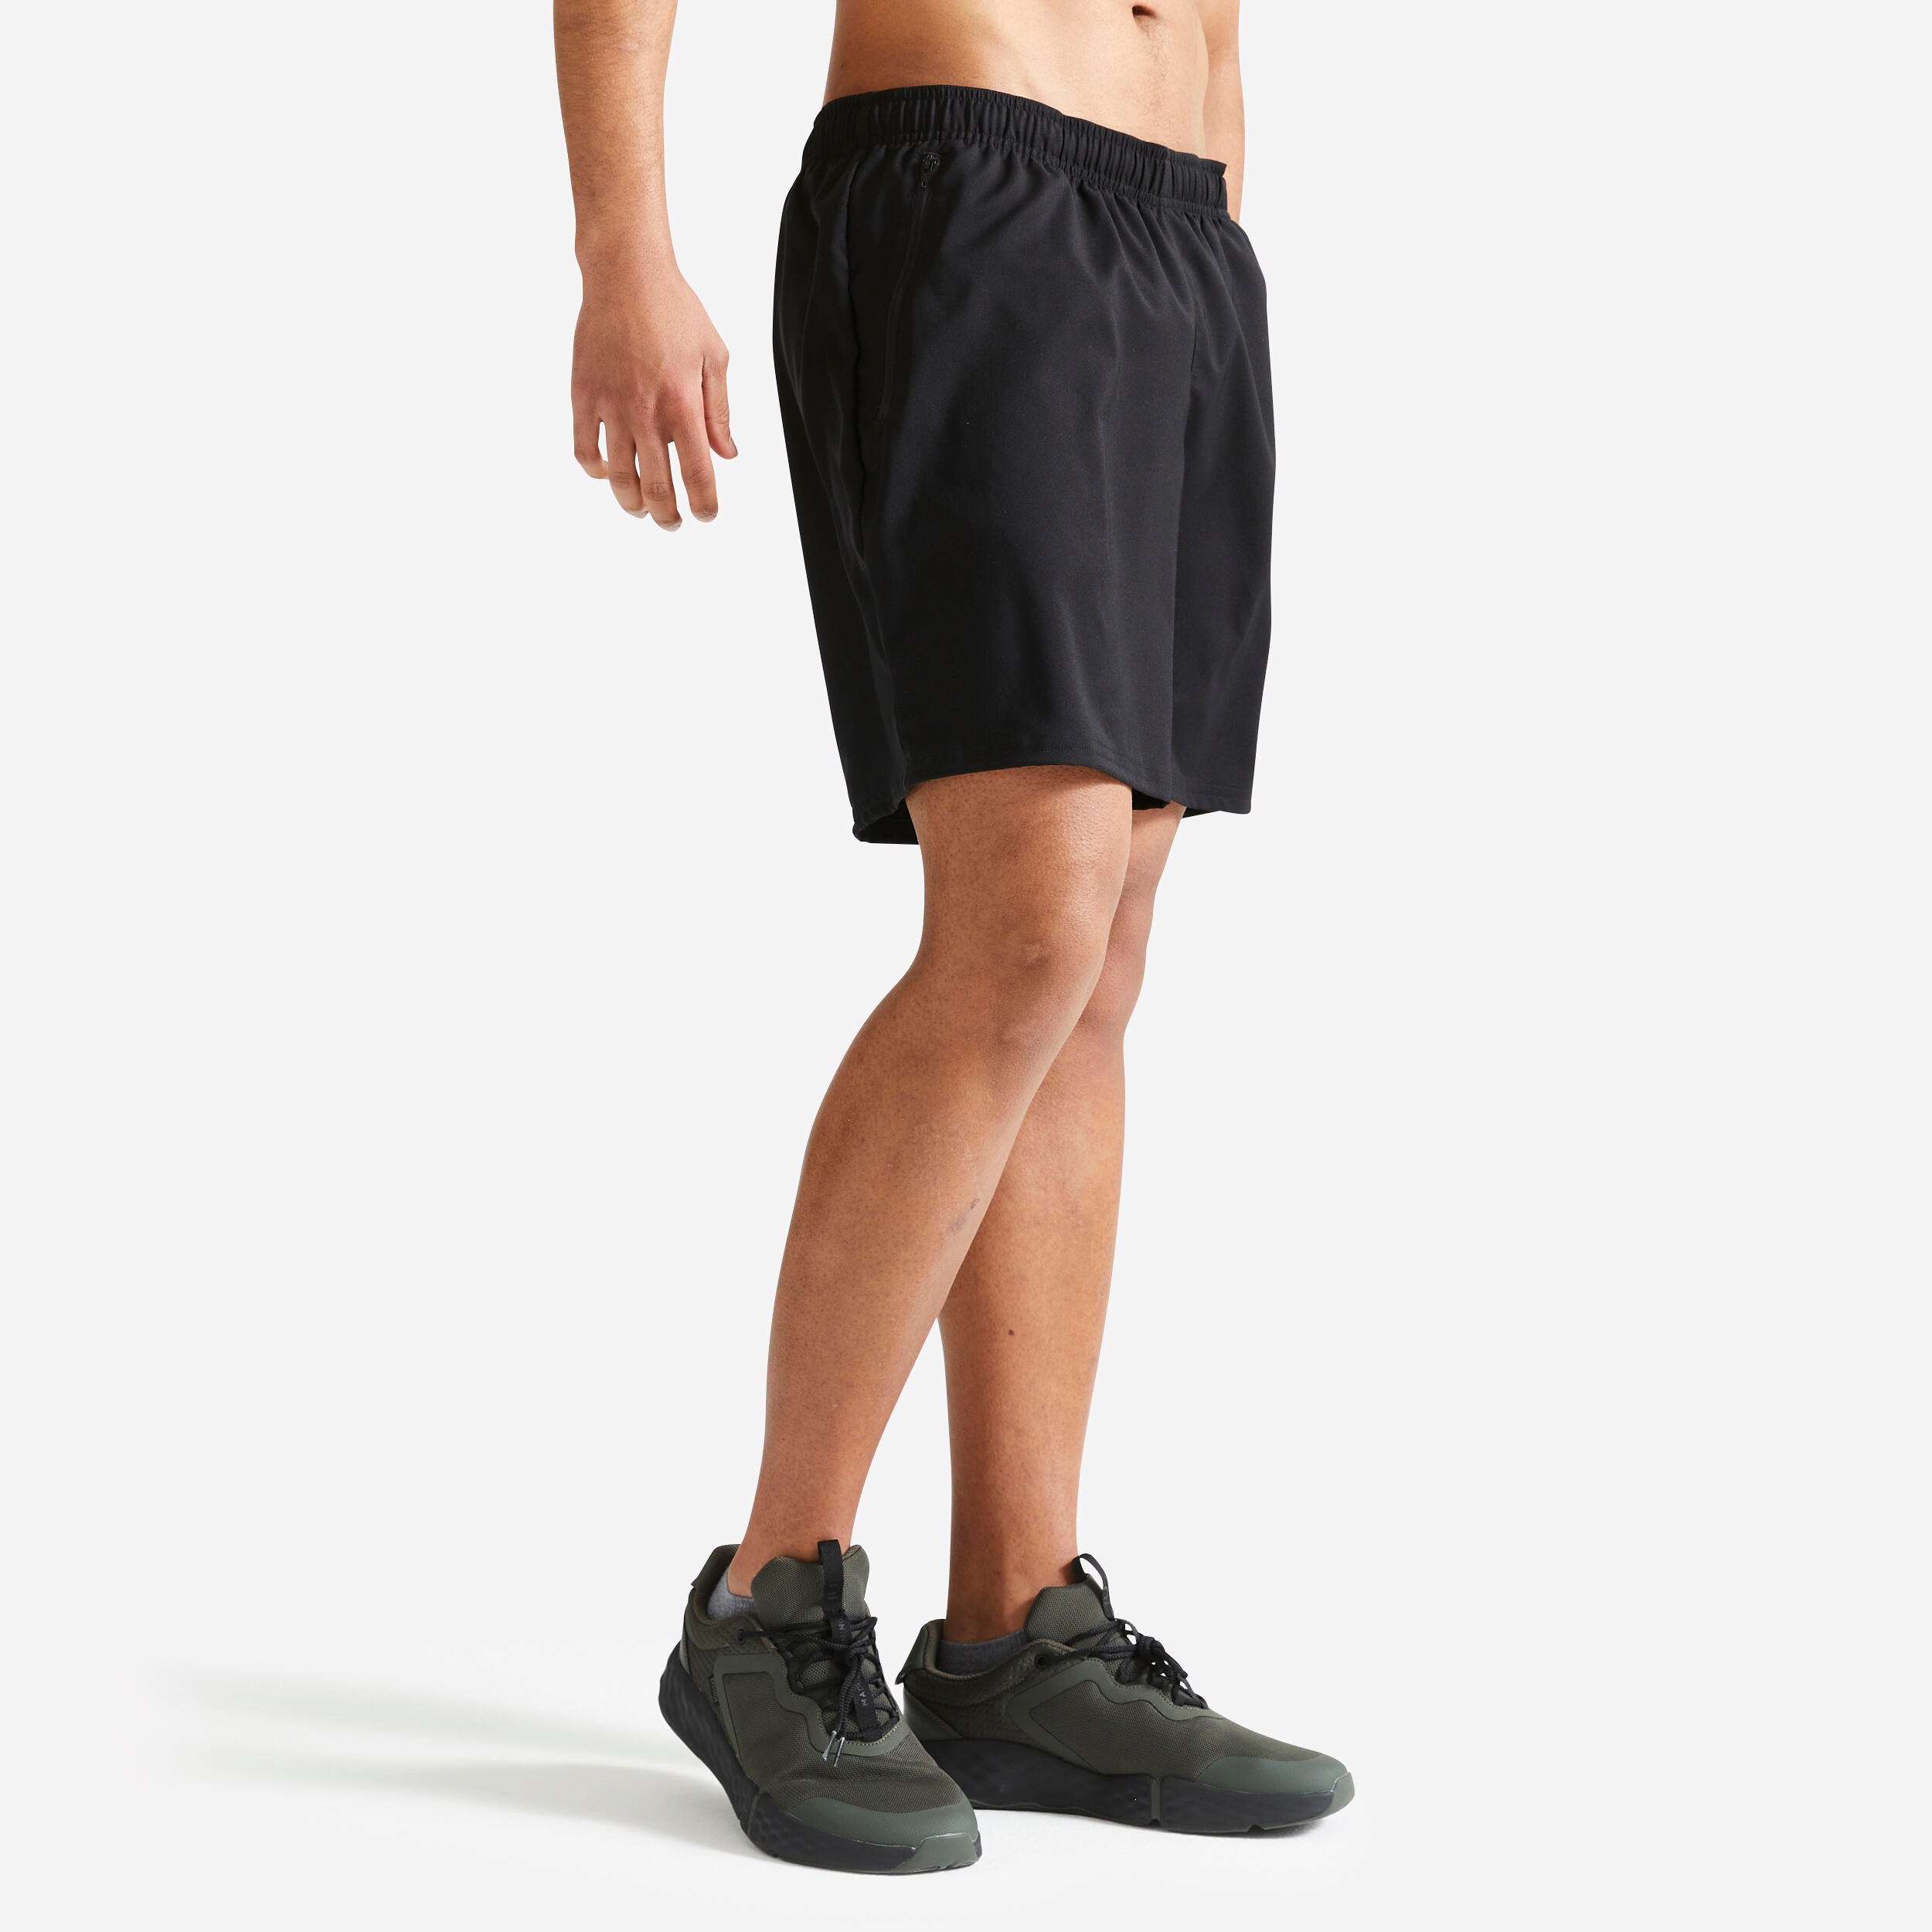 Men's Breathable Breathable Fitness Shorts - Black 1/7